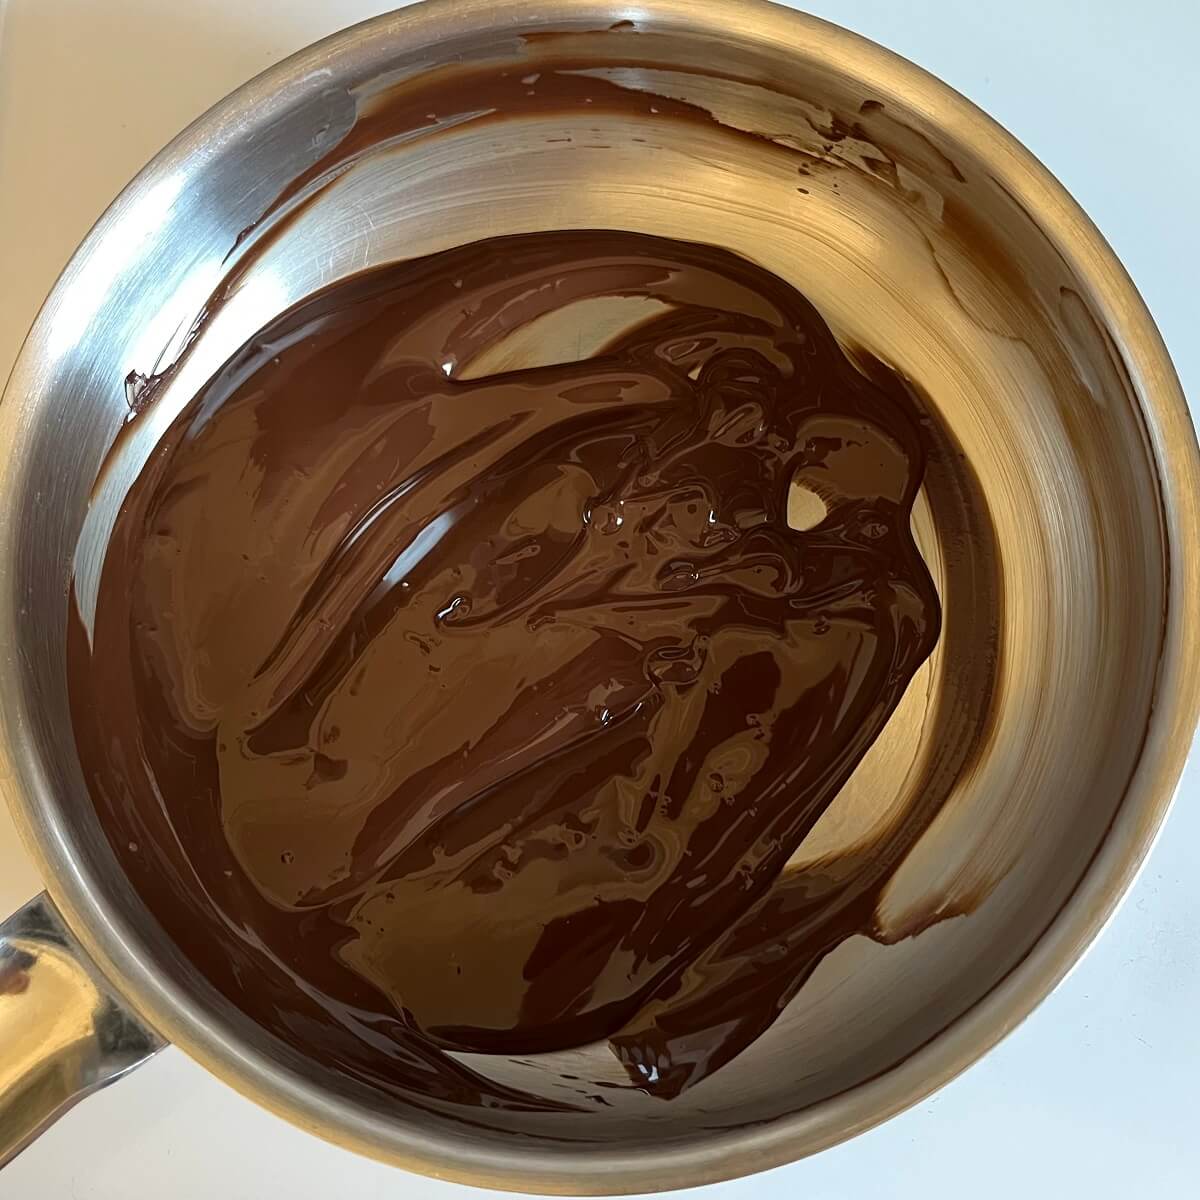 Melted dark chocolate in a steel pan.